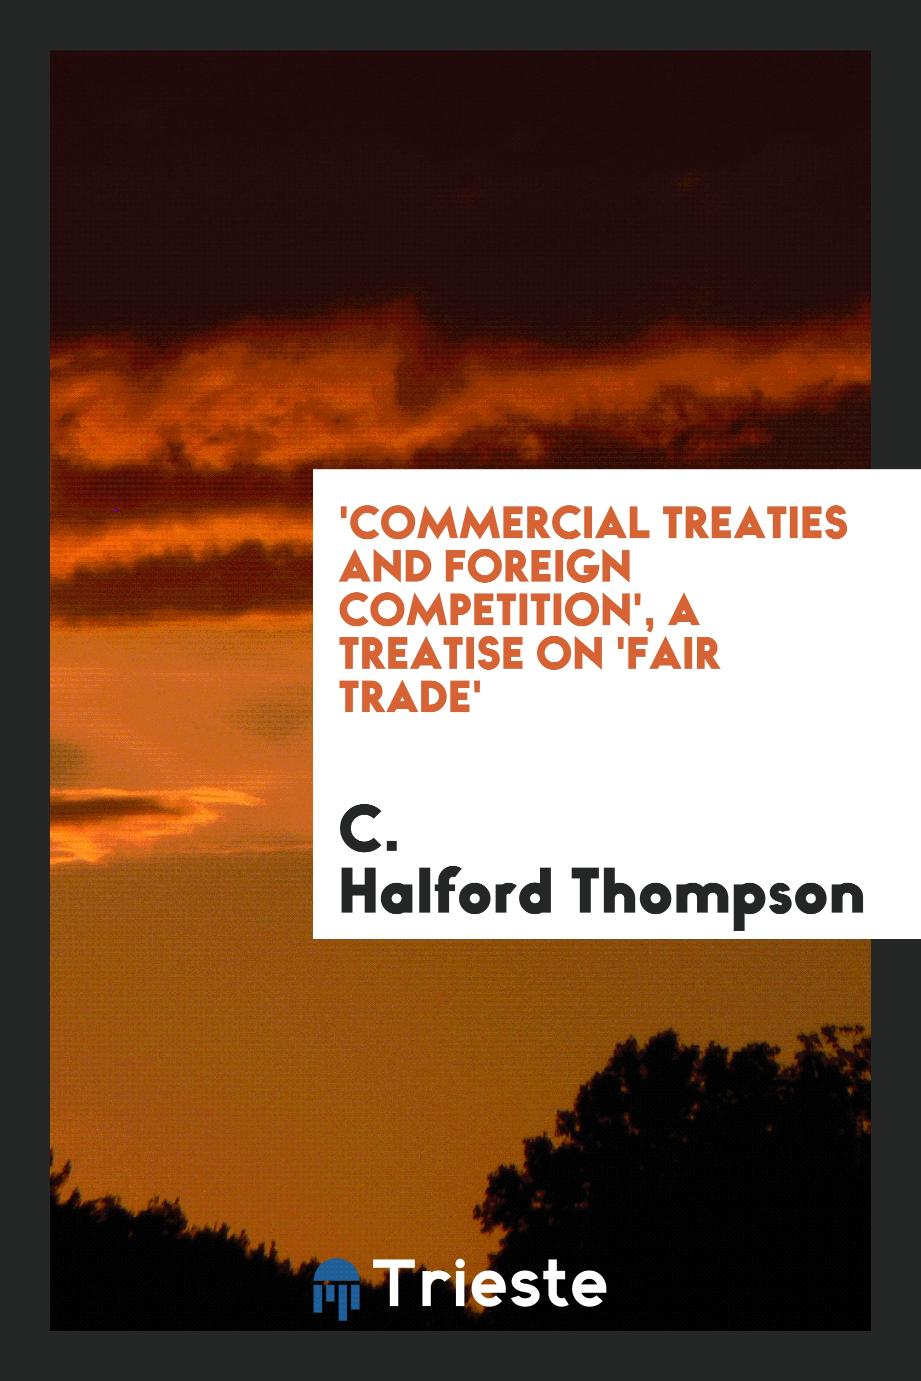 'Commercial treaties and foreign competition', a treatise on 'fair trade'